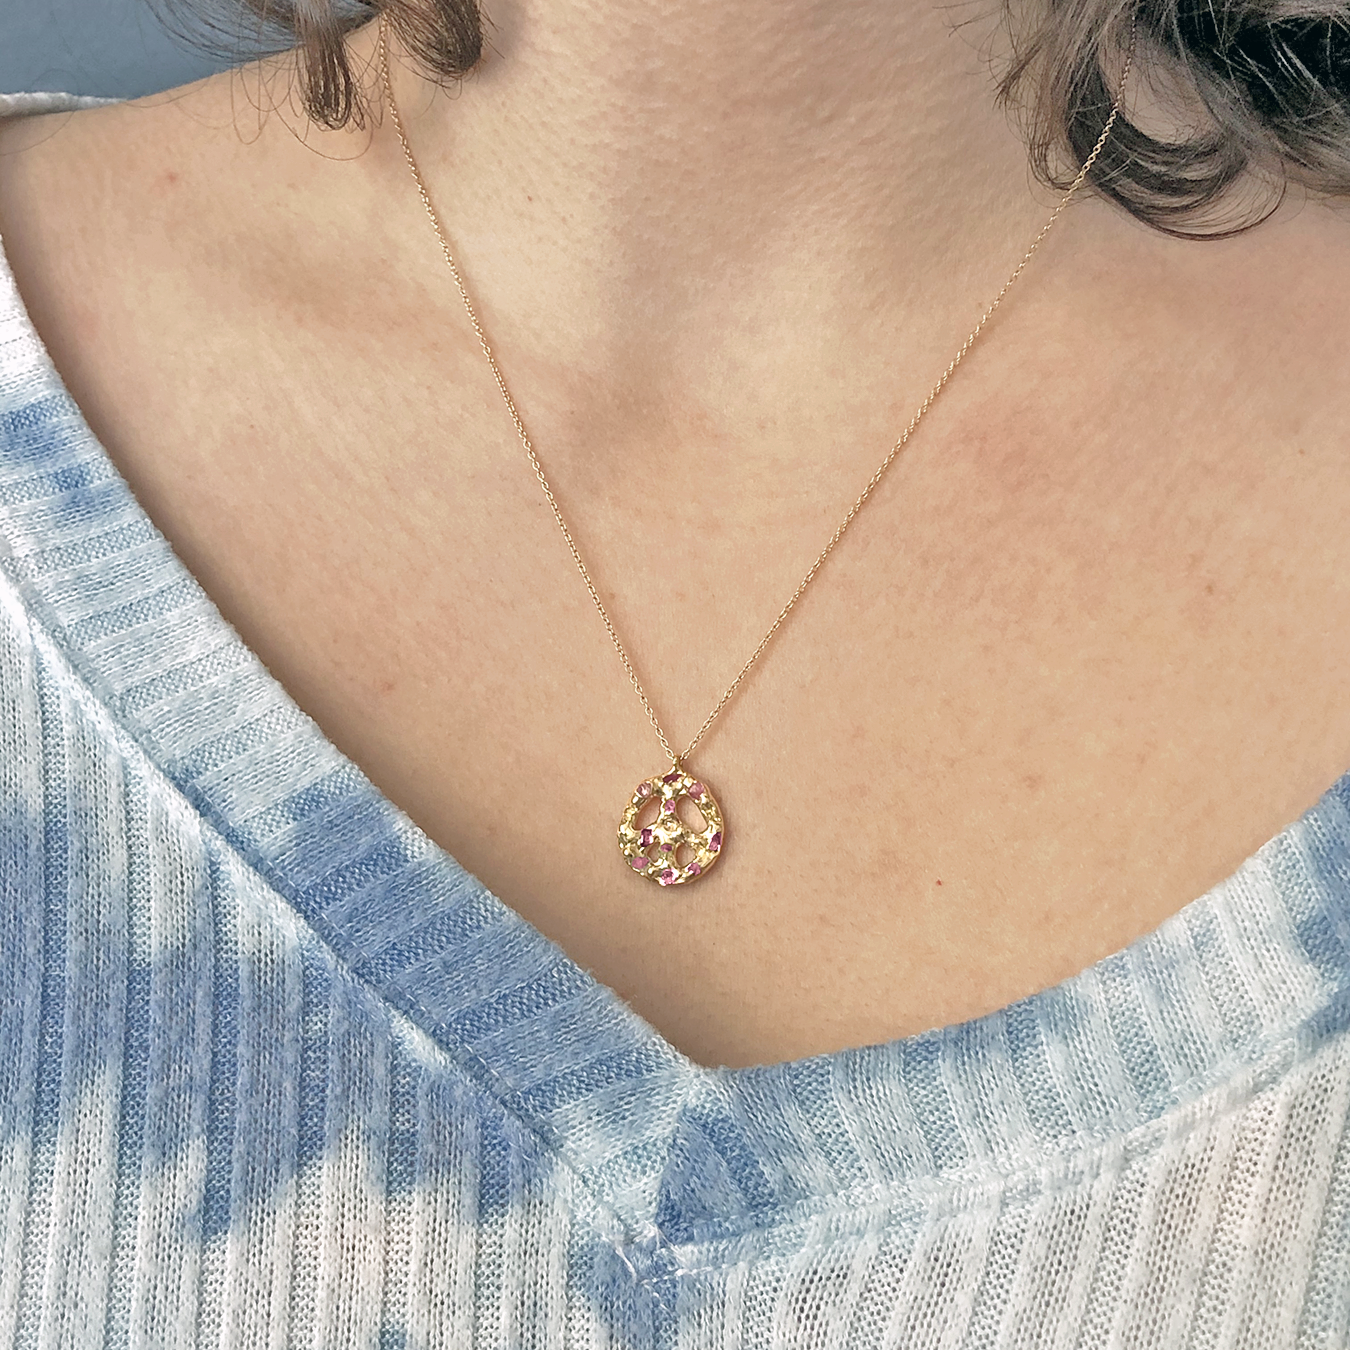 14k Gold 'Imagine' Pendant Necklace with Pink Sapphires